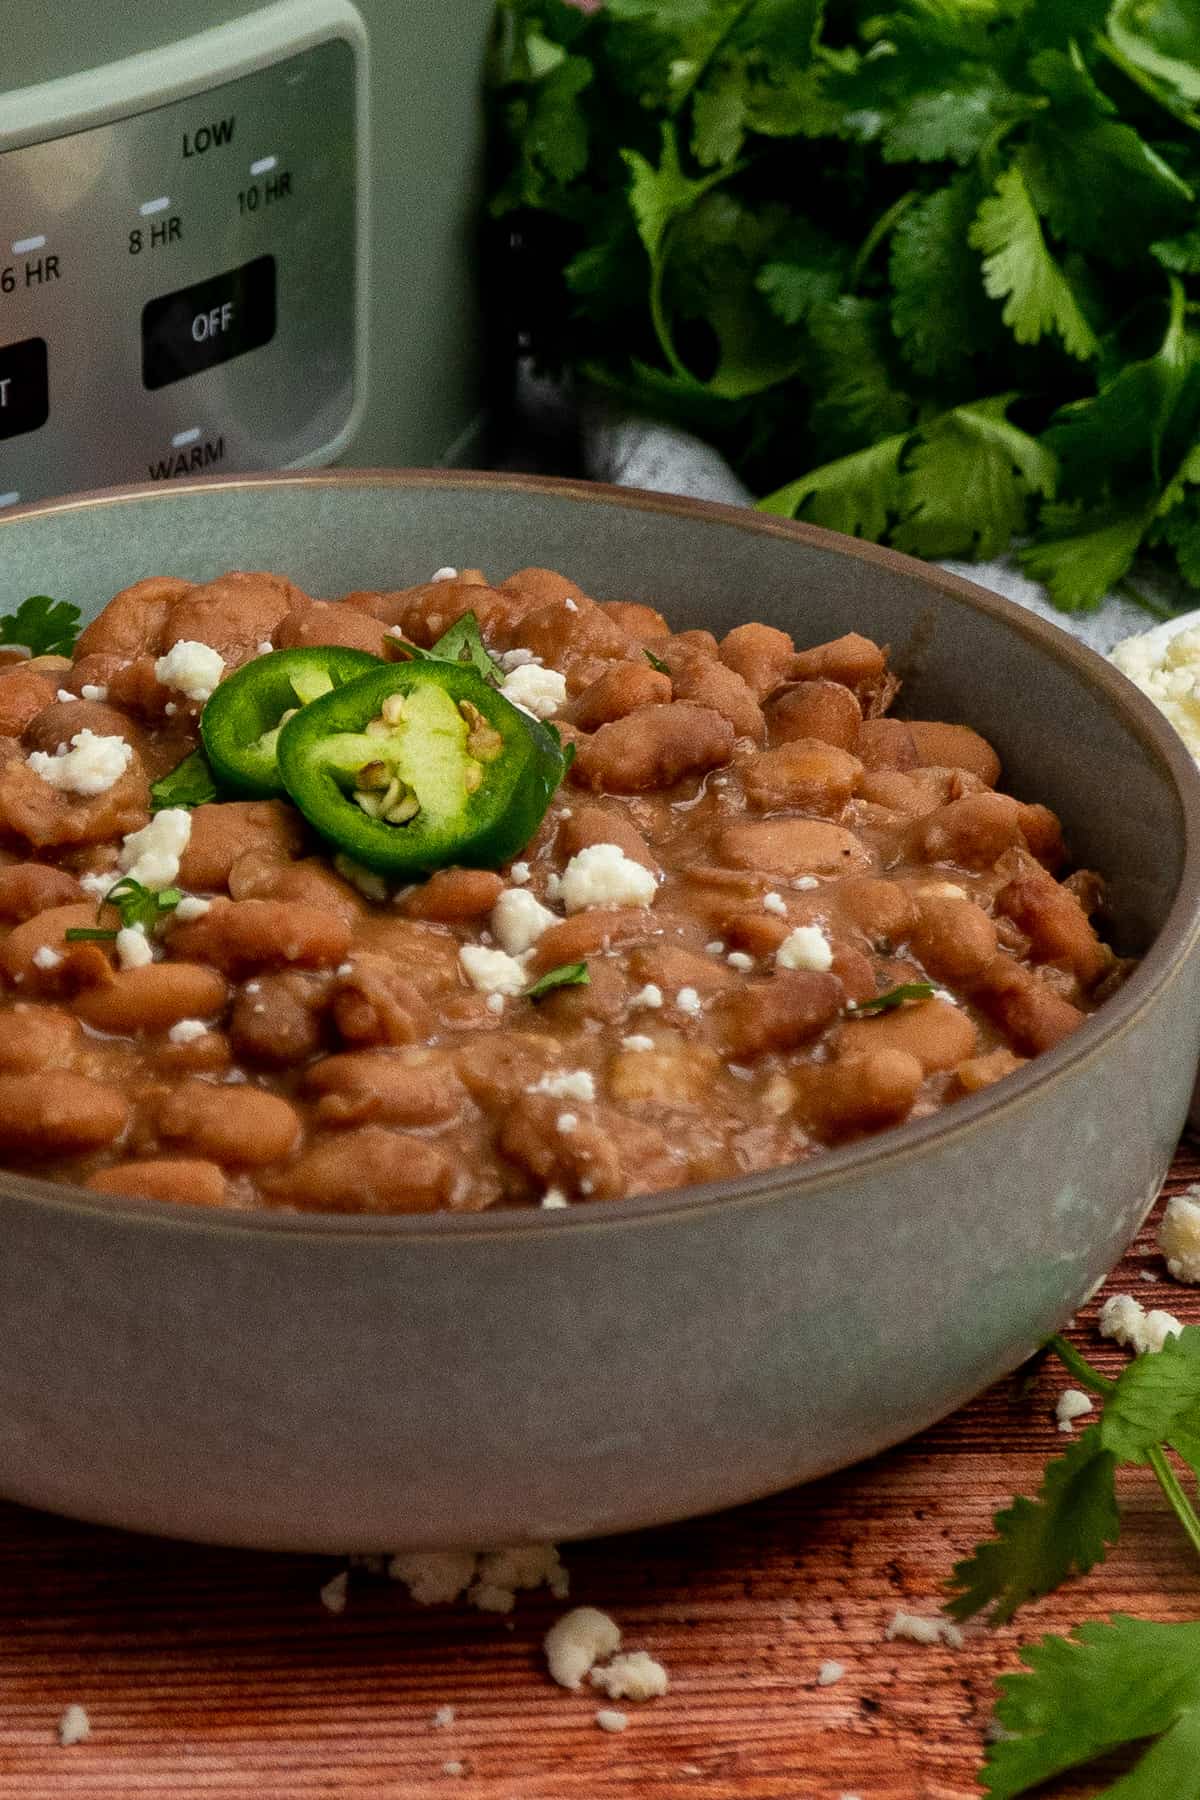 Pinto beans in a bowl with a slow cooker in the background.